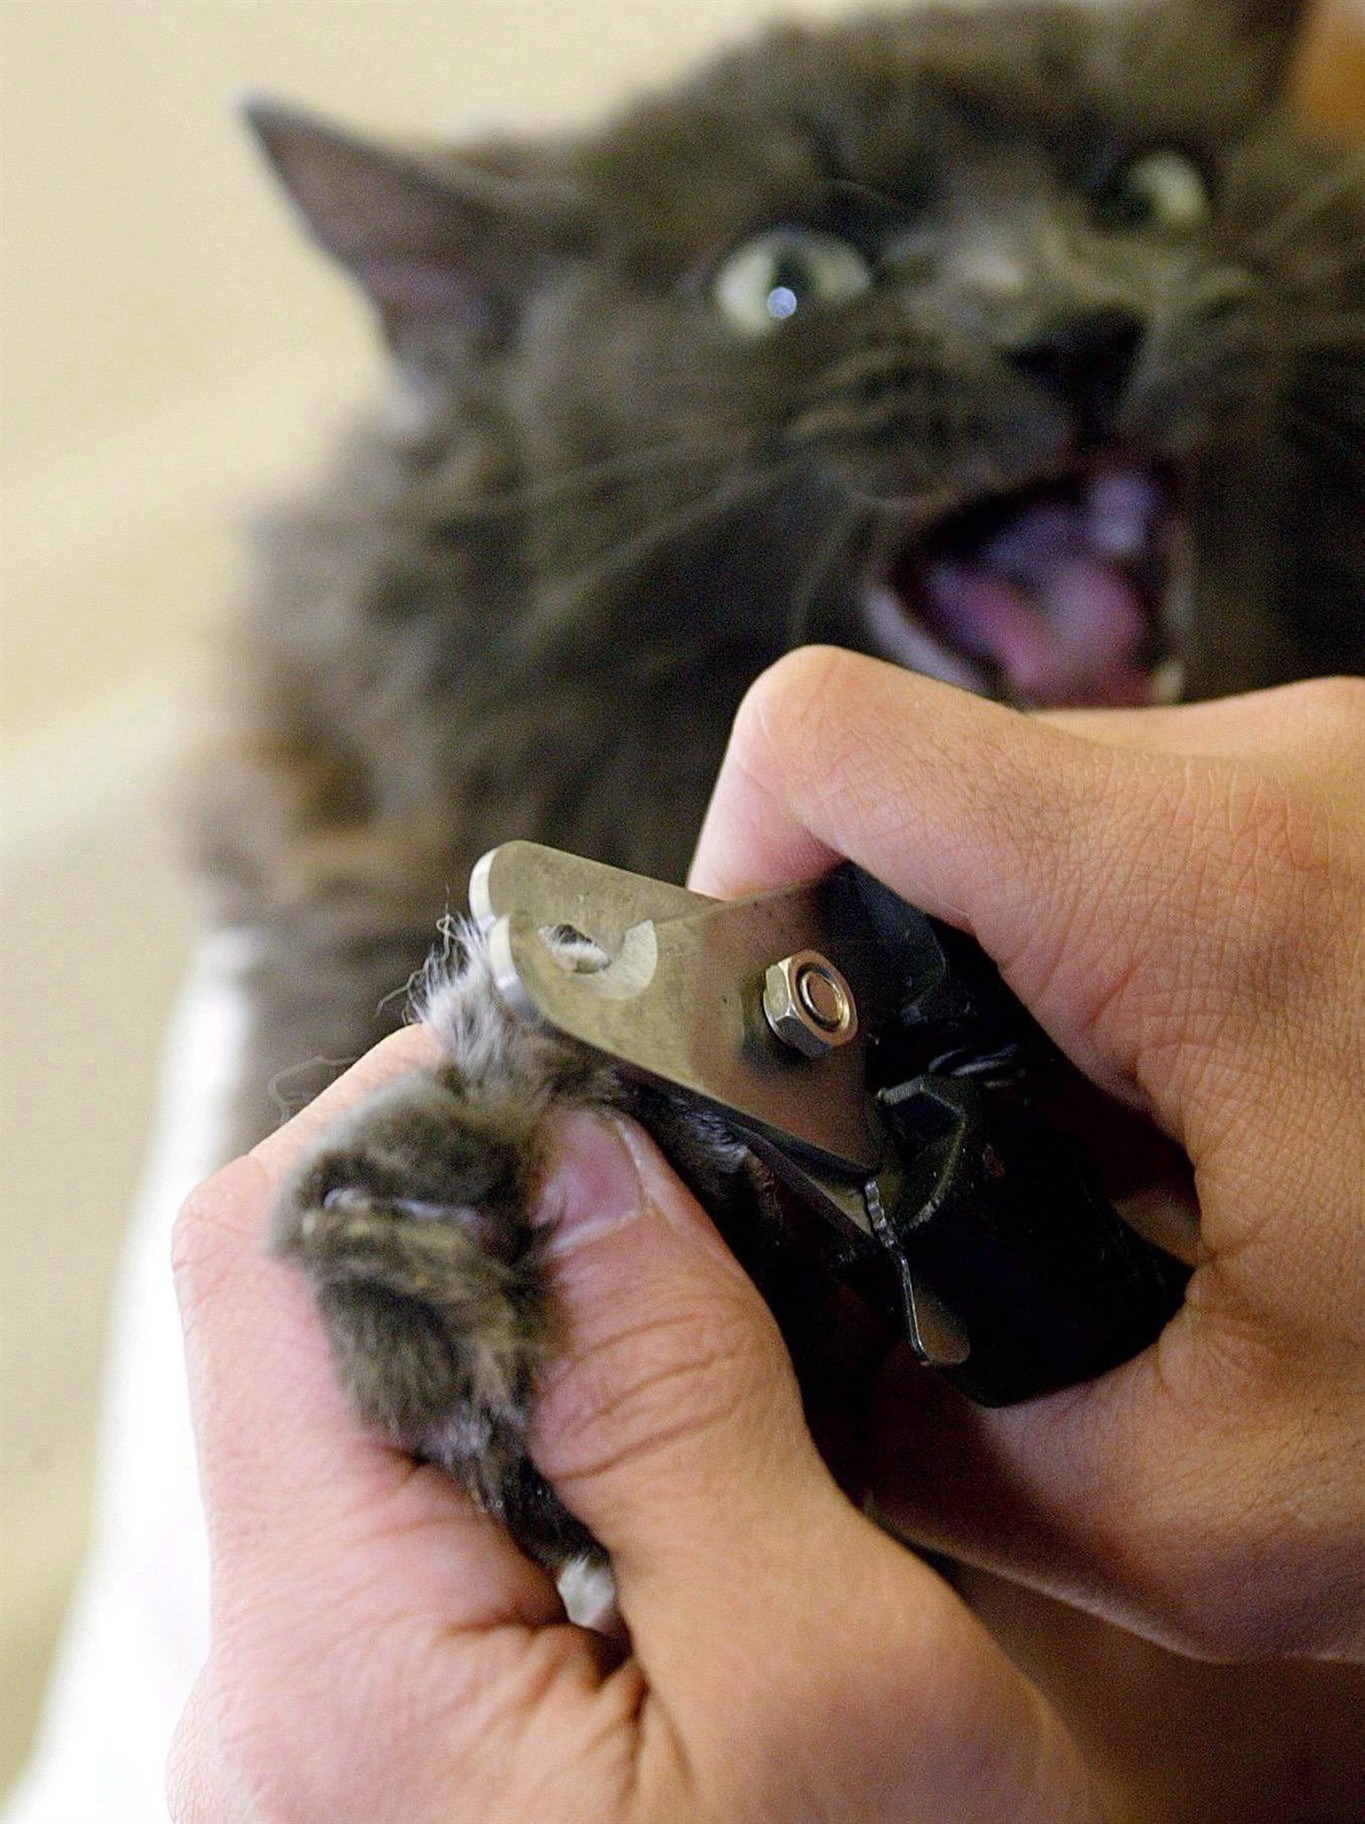 The inhuman act of cat declawing is now banned in New York Catman